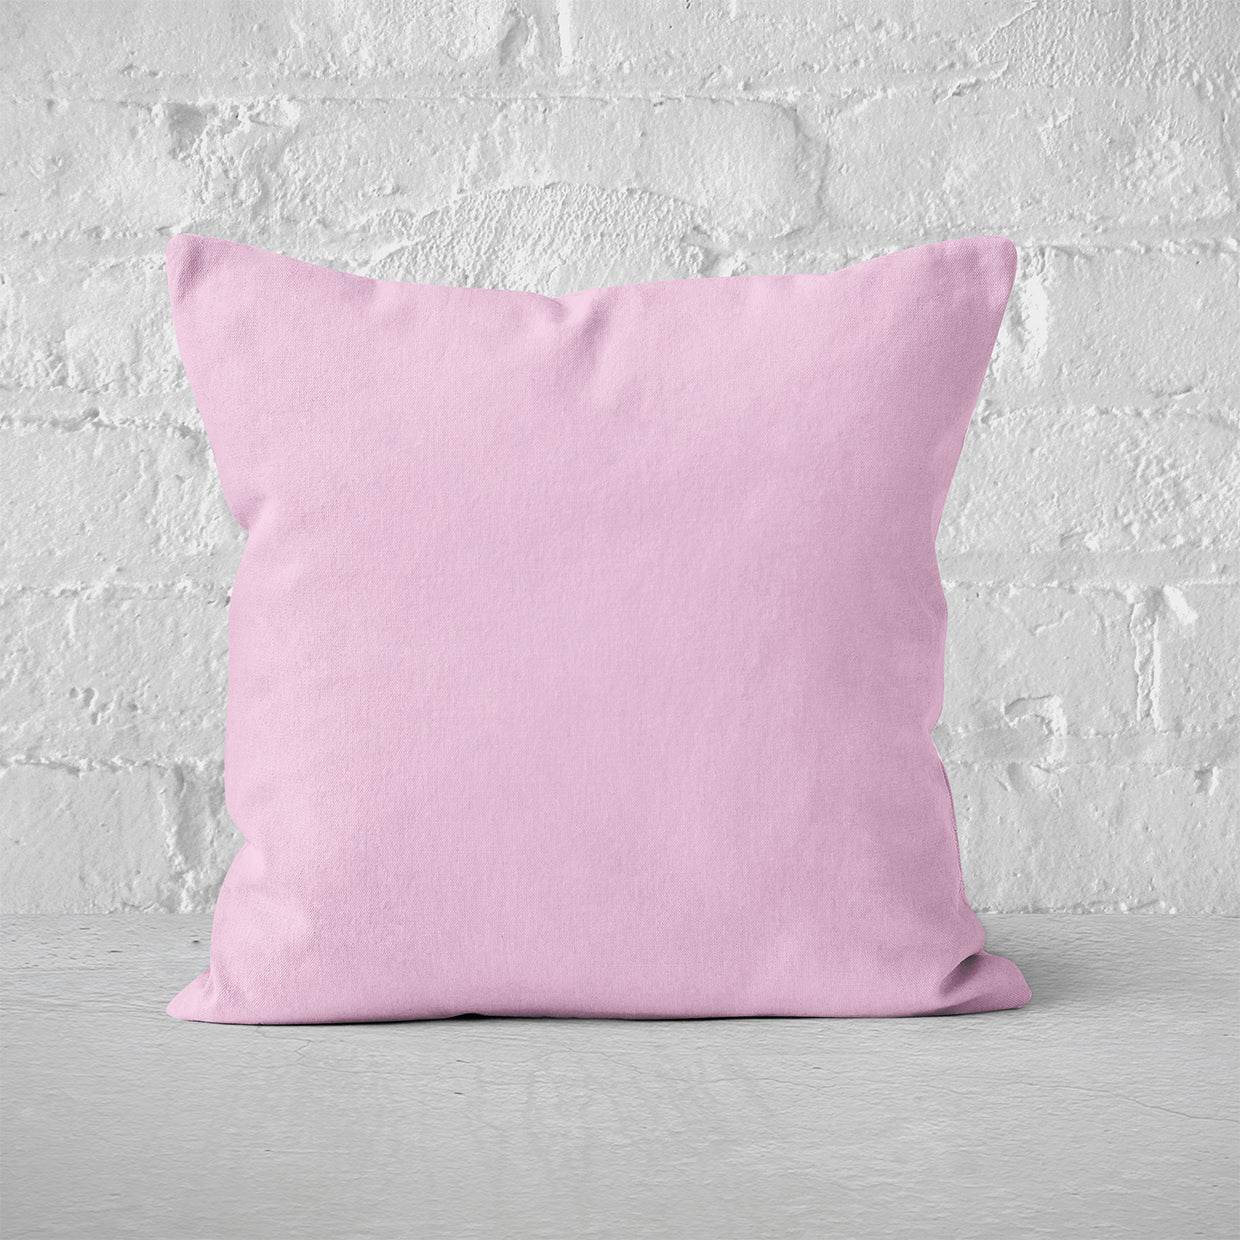 Pillow Cover Art Feature 'Solid' - Light Pink - Cotton Twill